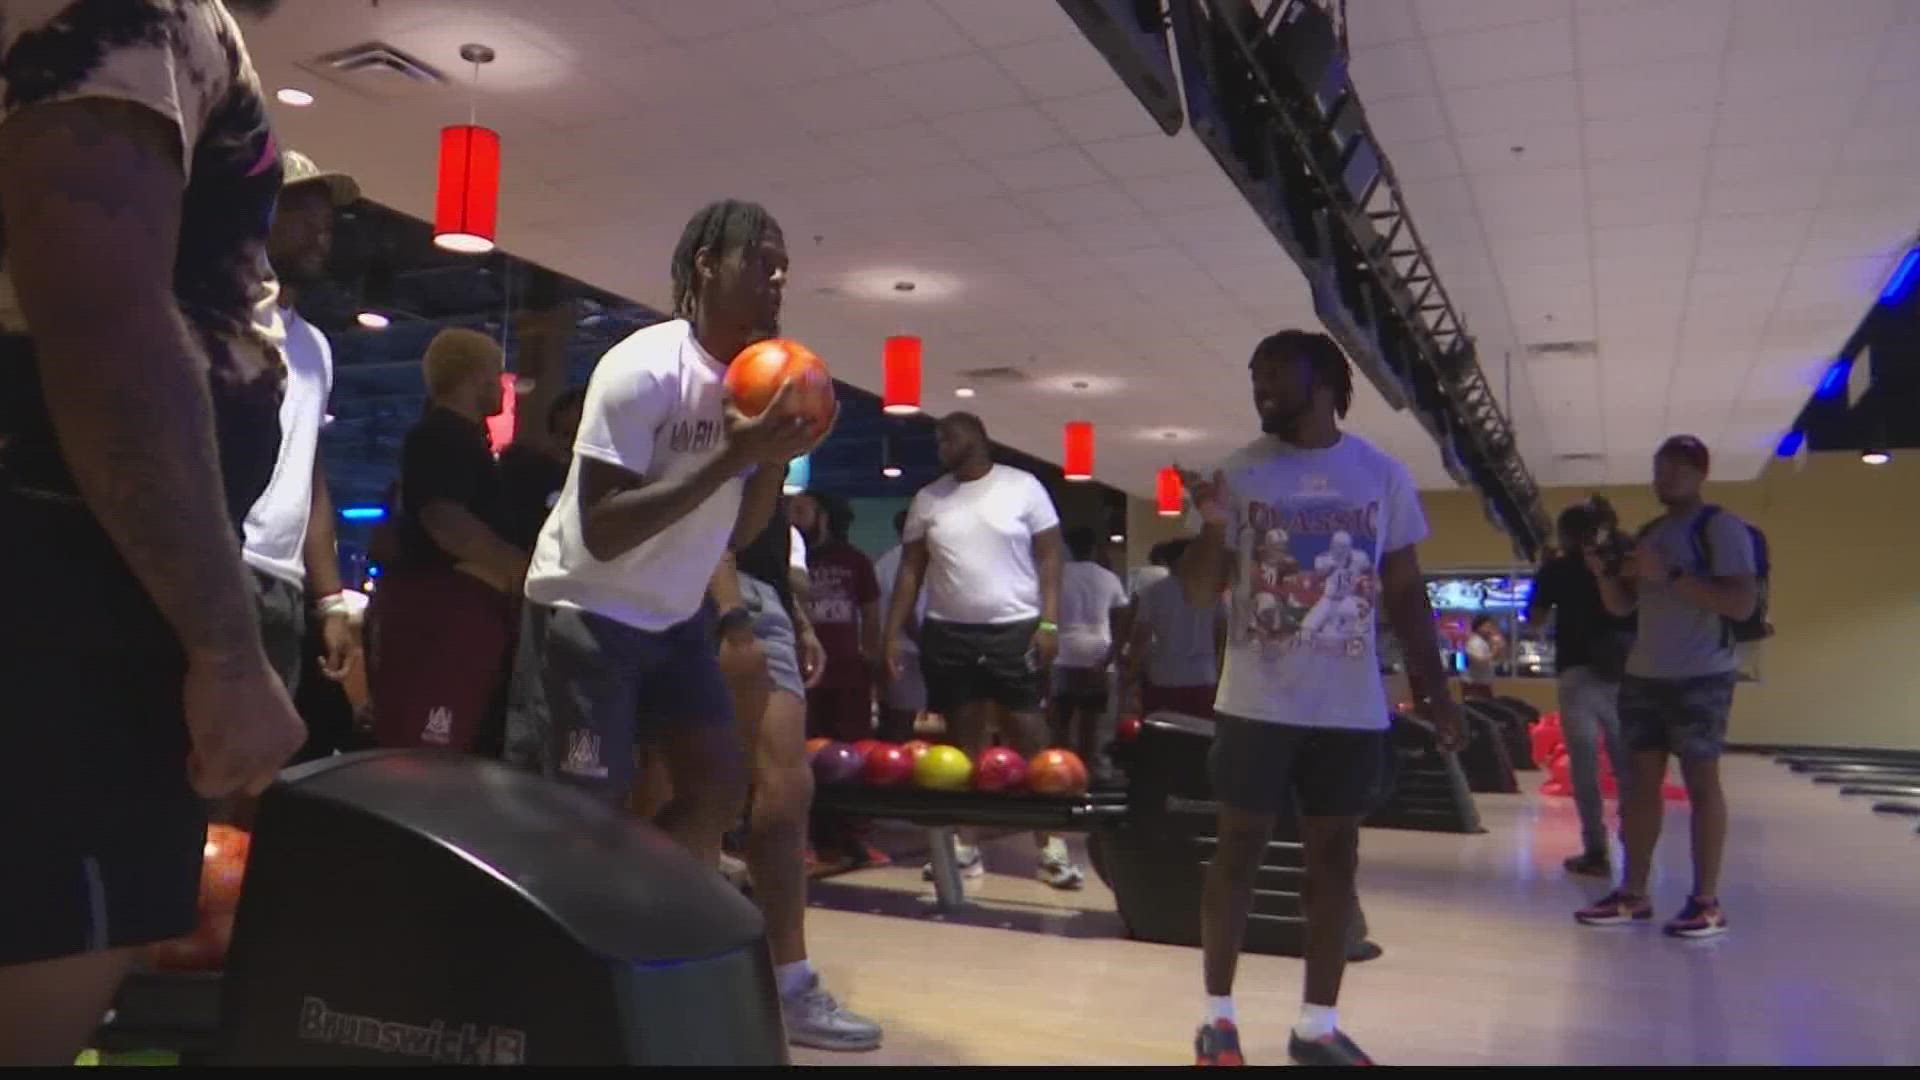 The Alabama A&M Bulldogs football team traveled to "Stars and Strikes" for a unity and team bonding event prior to preseason camp